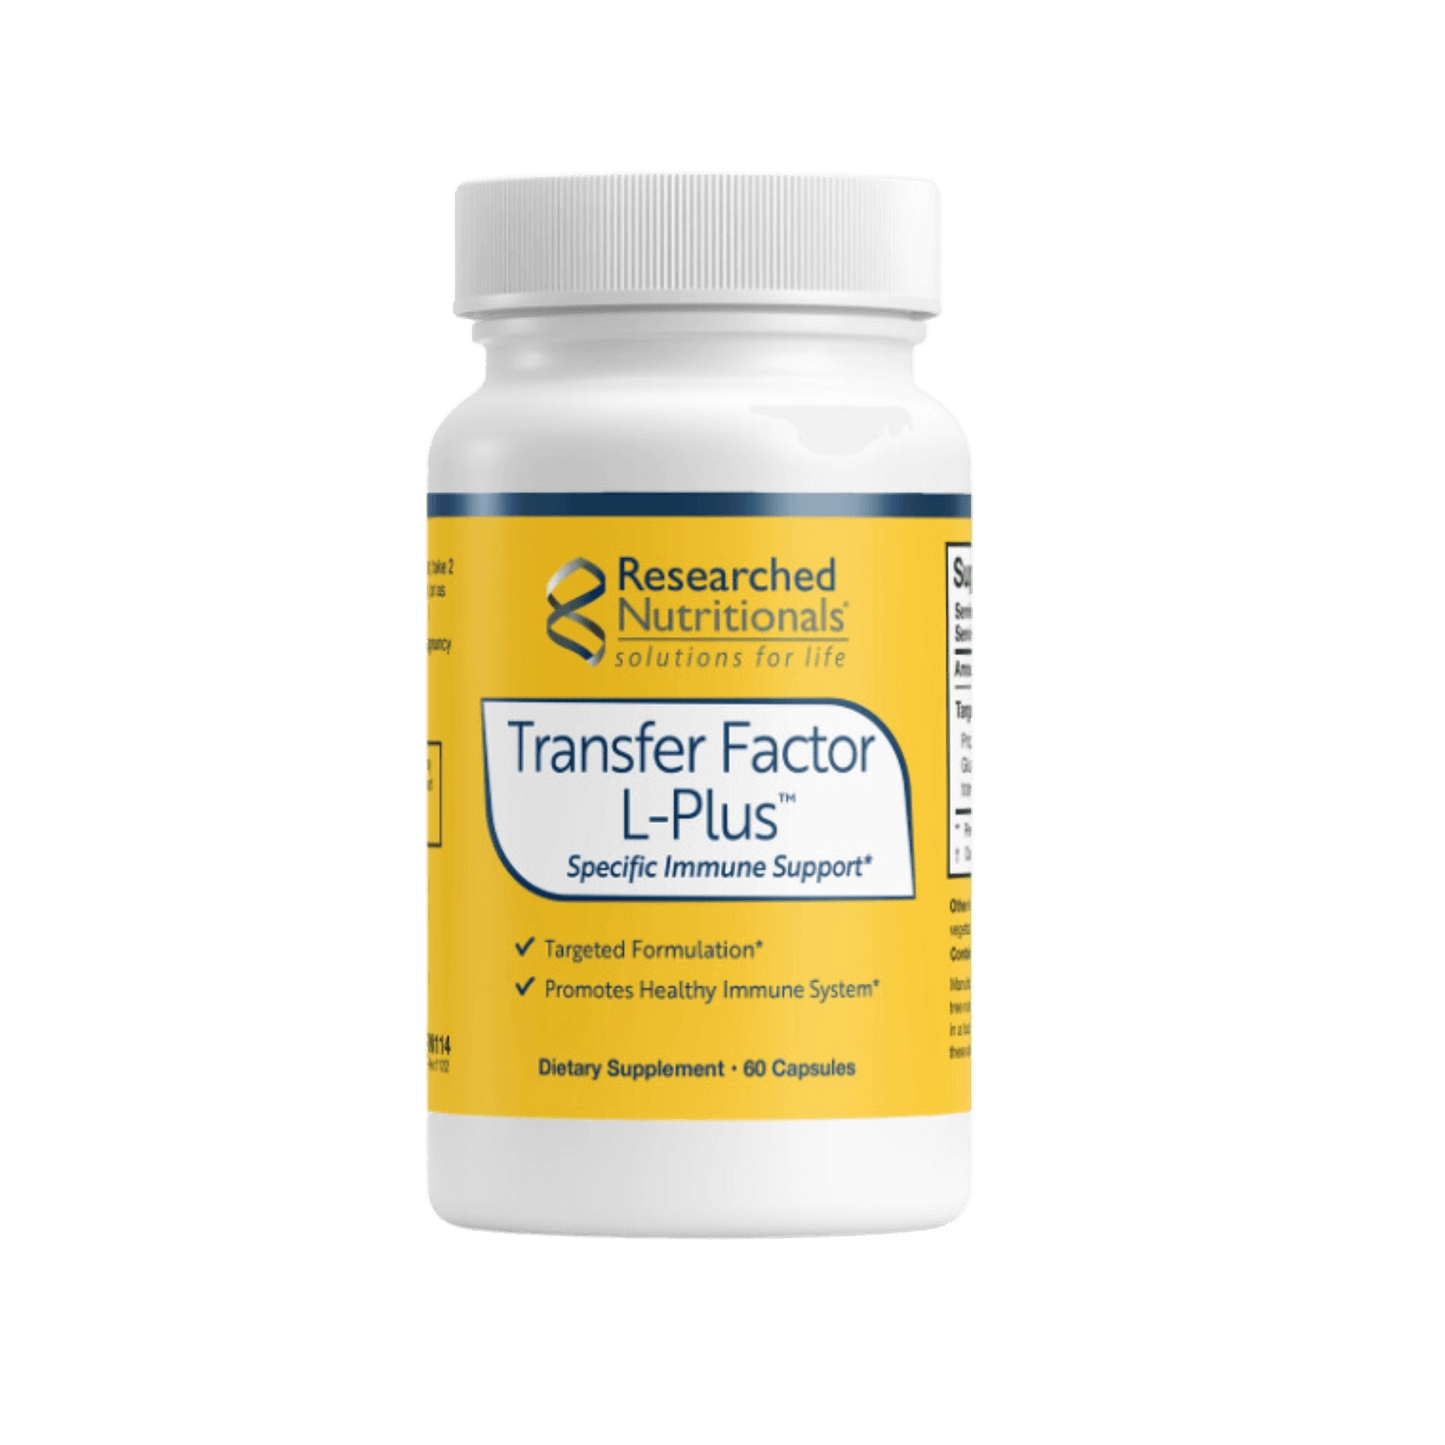 Researched Nutritionals Transfer Factor L-Plus